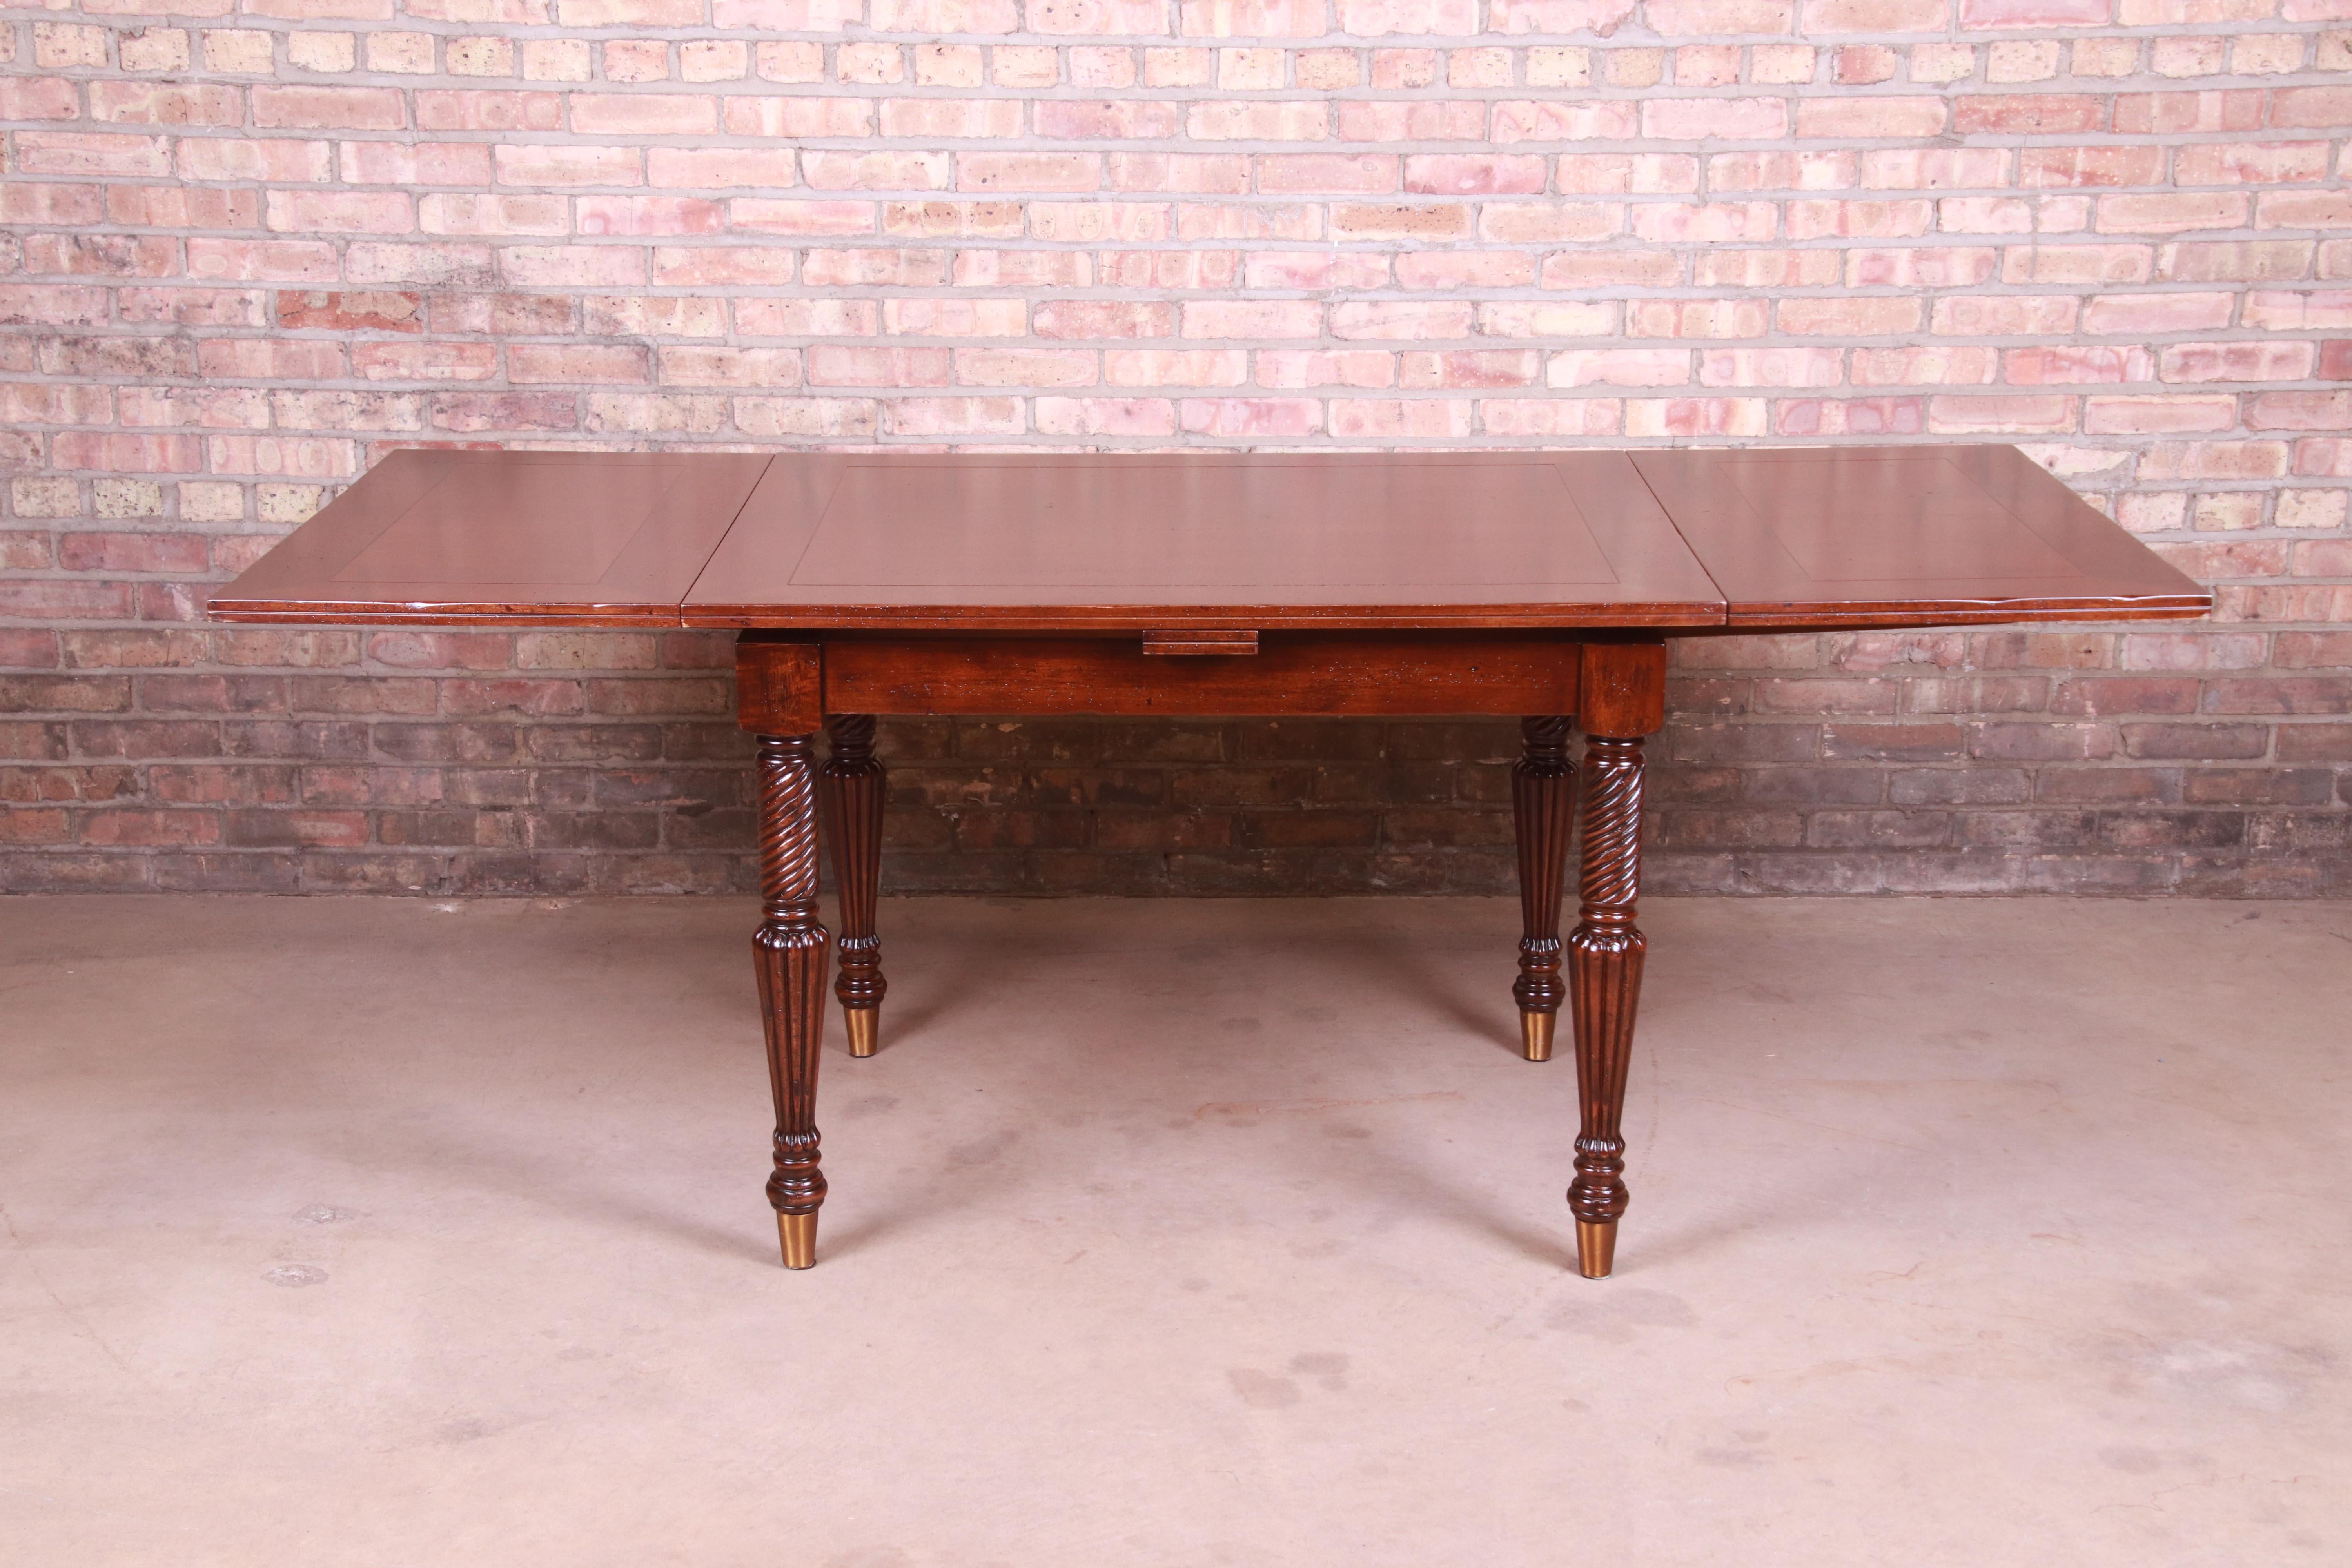 Italian Provincial Walnut Extension Dining Table by Guido Zichele, Refinished 1